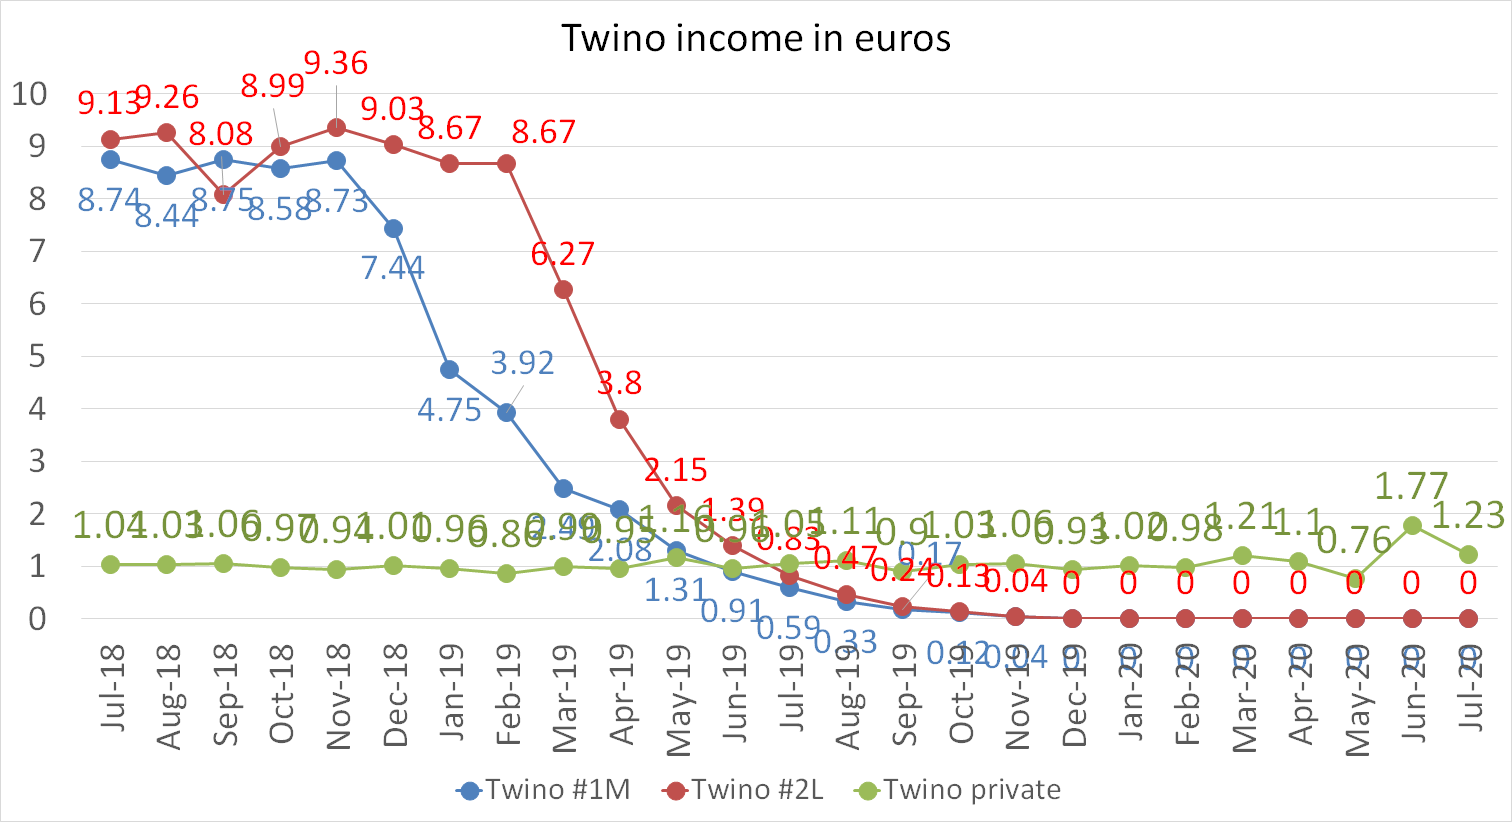 Twino interest income in euros july 2020